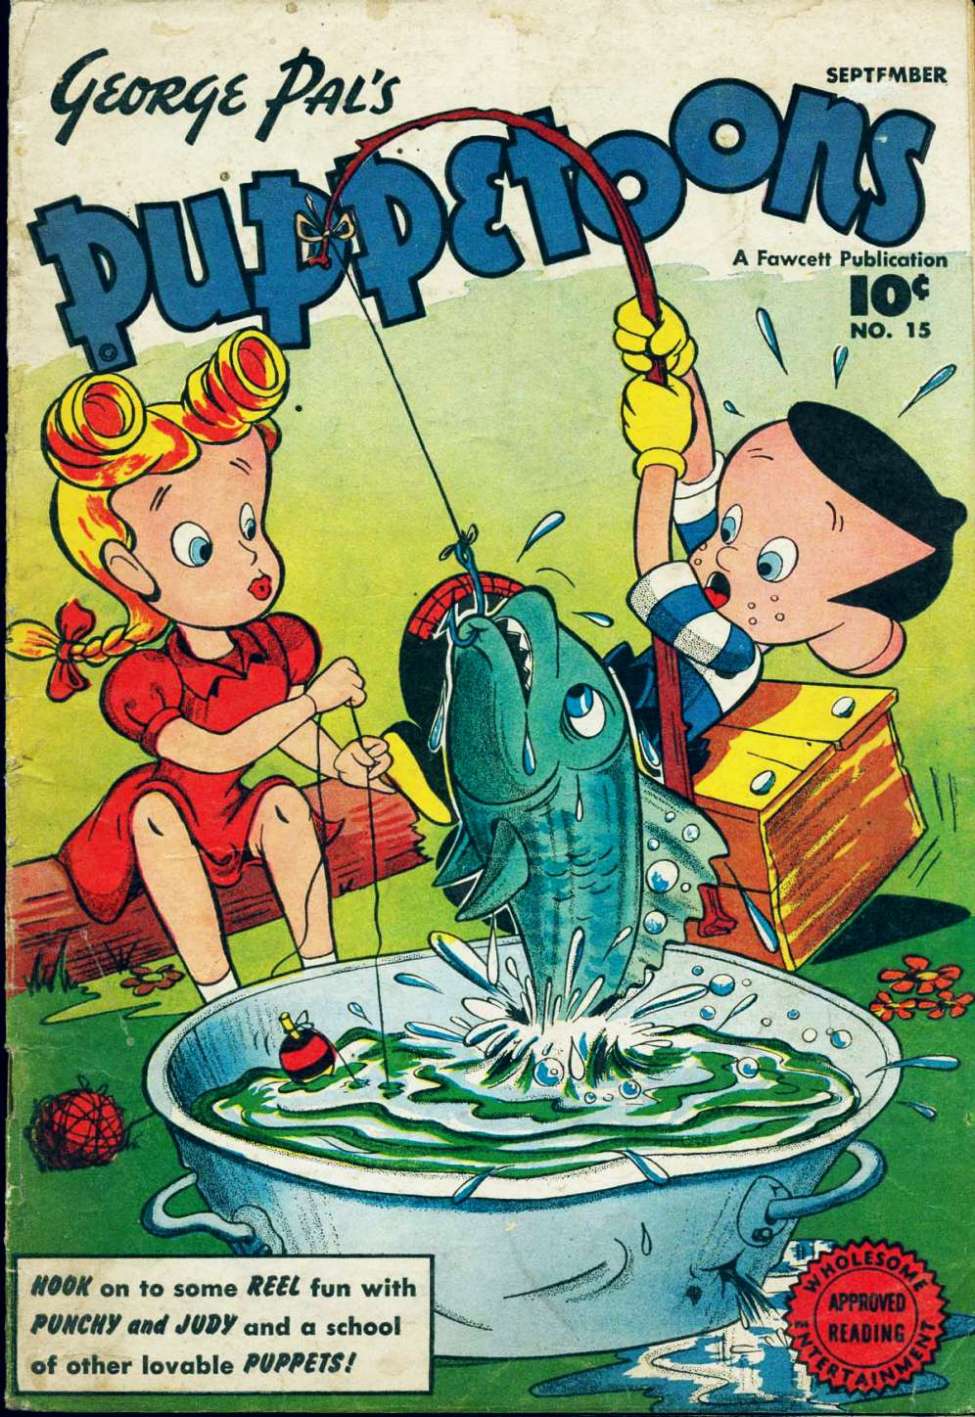 Book Cover For George Pal's Puppetoons 15